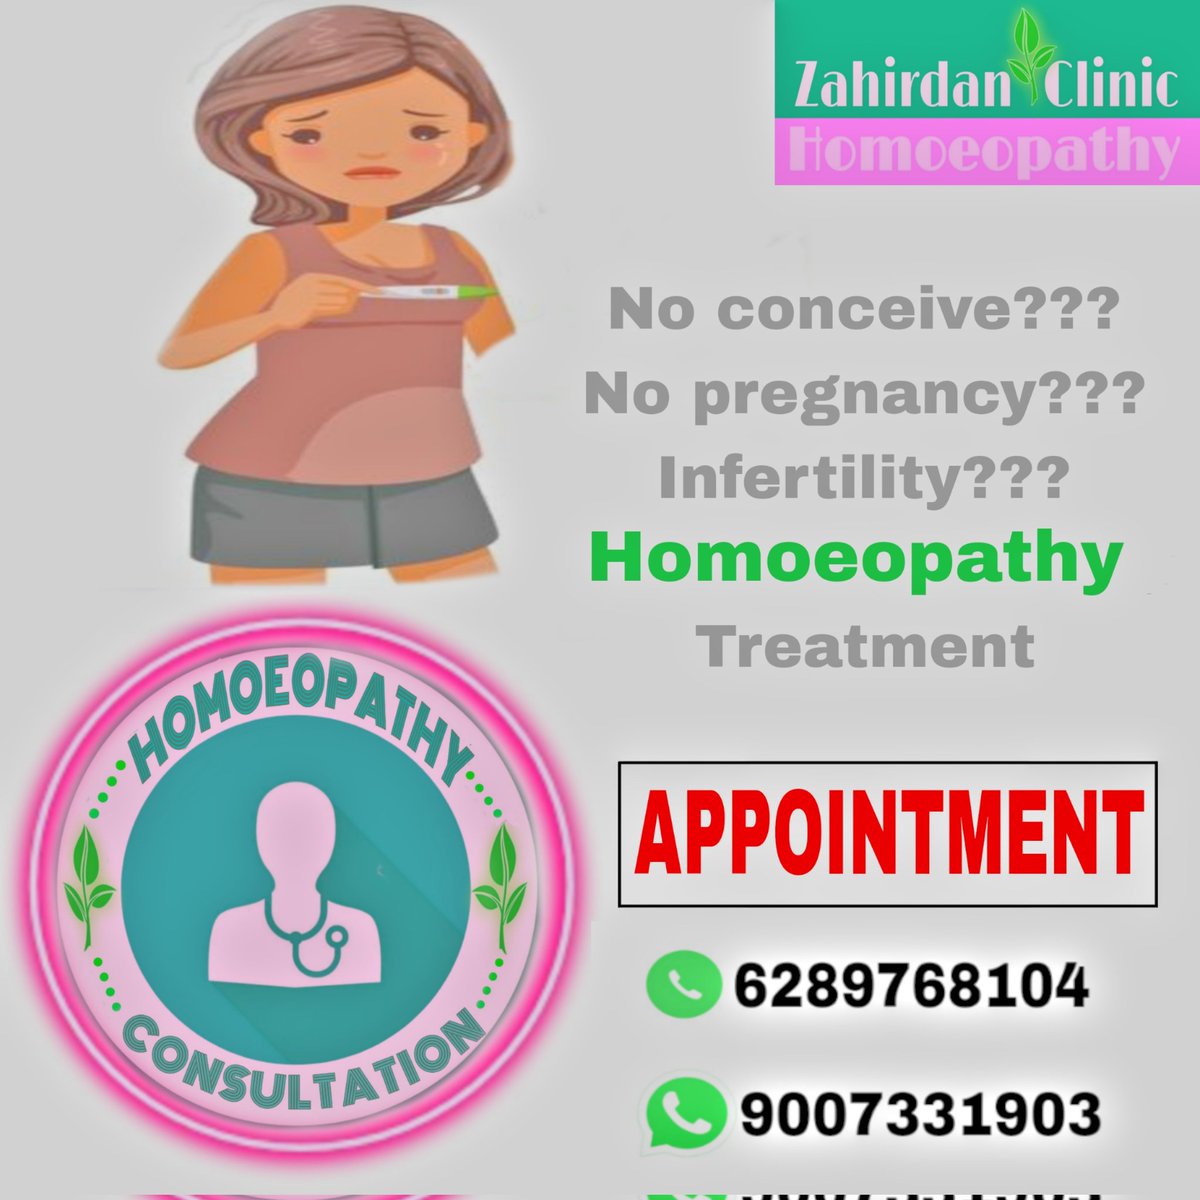 #zahirdanclinic #homoeopathy #homoeopathicmedicine #homoeopathyworks #homoeopathyheals #homoeopathyallinone #homoeopathyforall #homoeopathydoctors #homeopathicmedicine #infertility #infertilitytreatment #infertilitysupport #pregnancy #pregnancycare #conceivenaturally #conceive